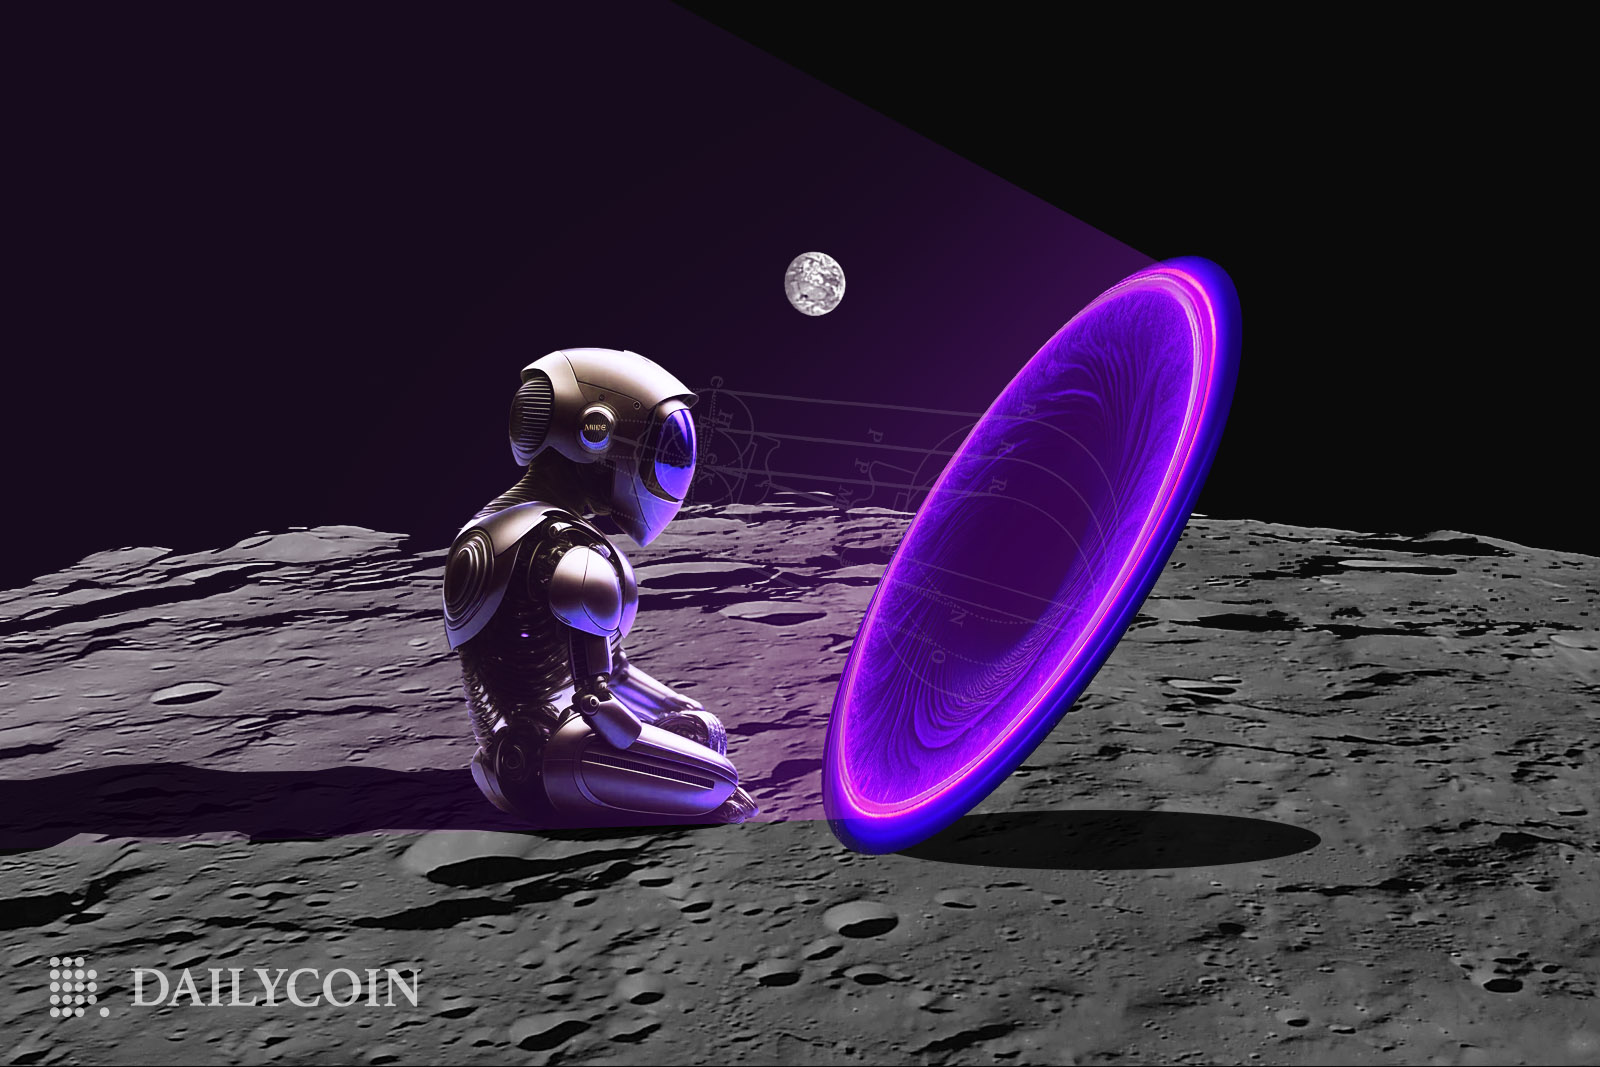 Alien astronaut robot sitting on the moon surface looking at the violet portal.